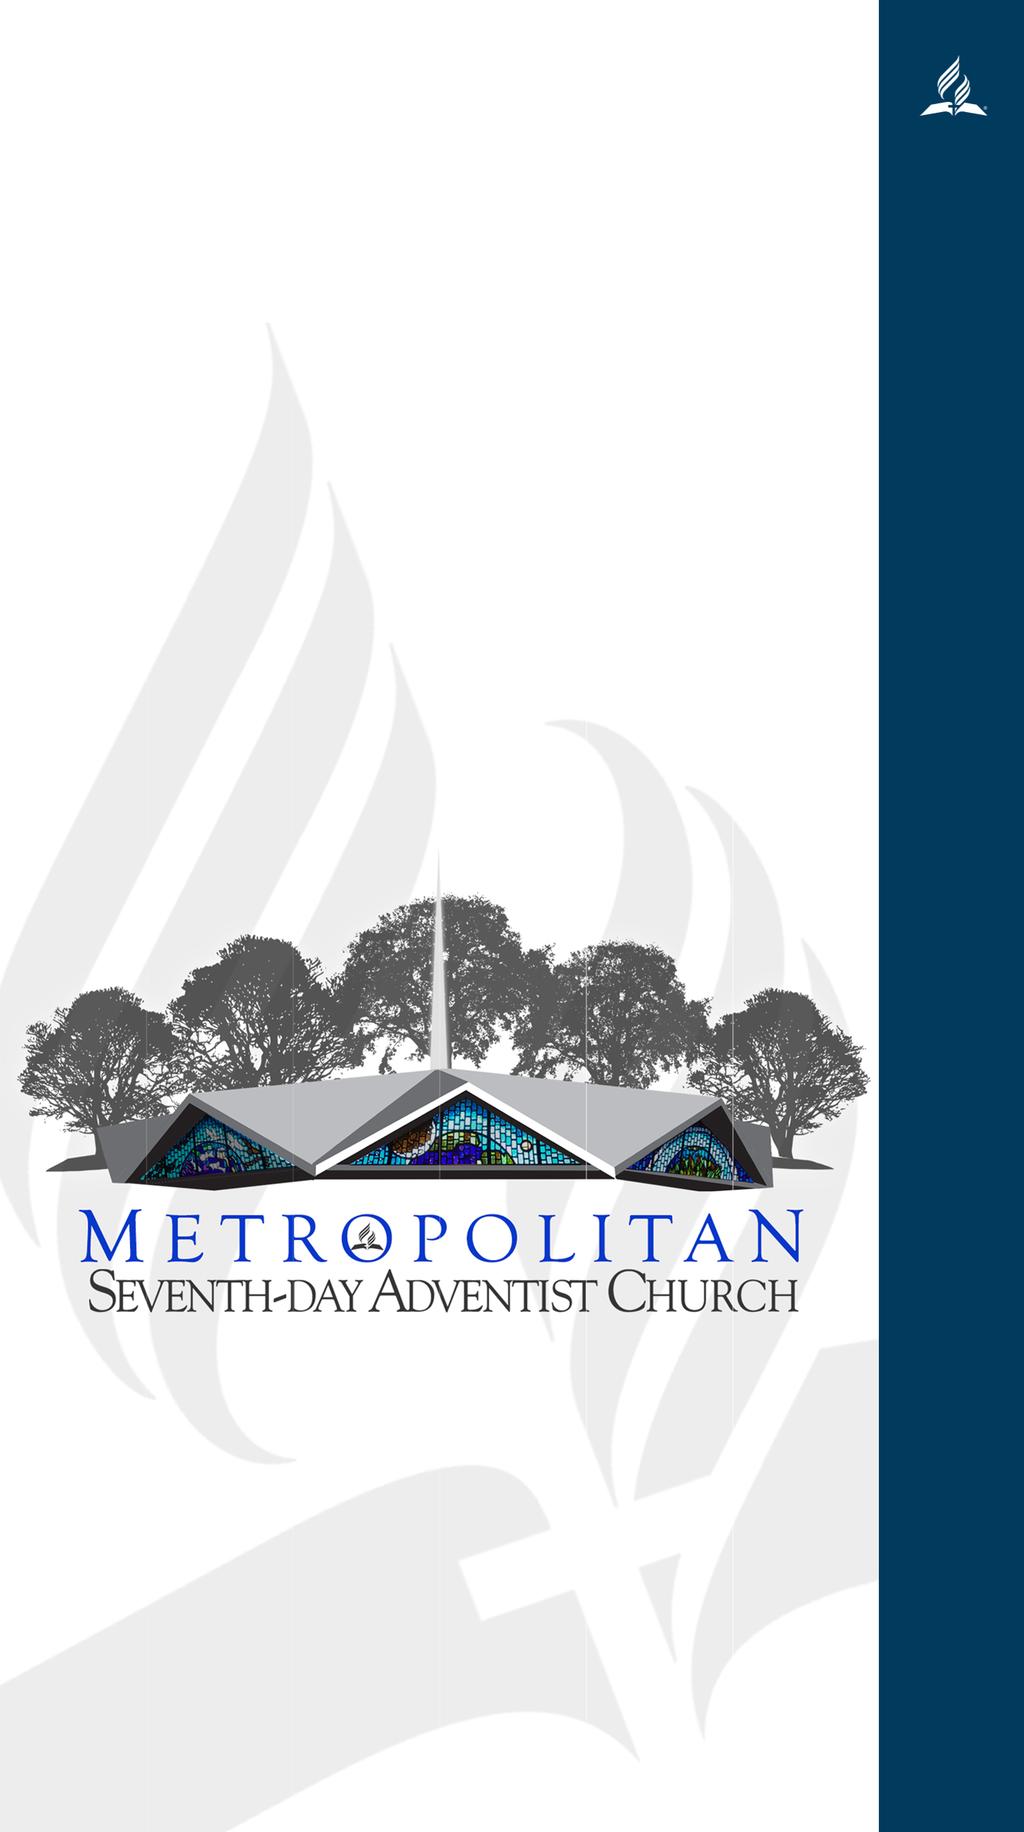 COMING EVENTS www.metrosdachurch.org/calendar Today: 9:30 a.m. SS; 10:45 a.m. Worship Service Special Annual Christmas Fellowship Dinner following service 1:15 p.m. Deacons Mtg in MJA Library 2 p.m. Cedarbrook Christmas Concert 6 p.